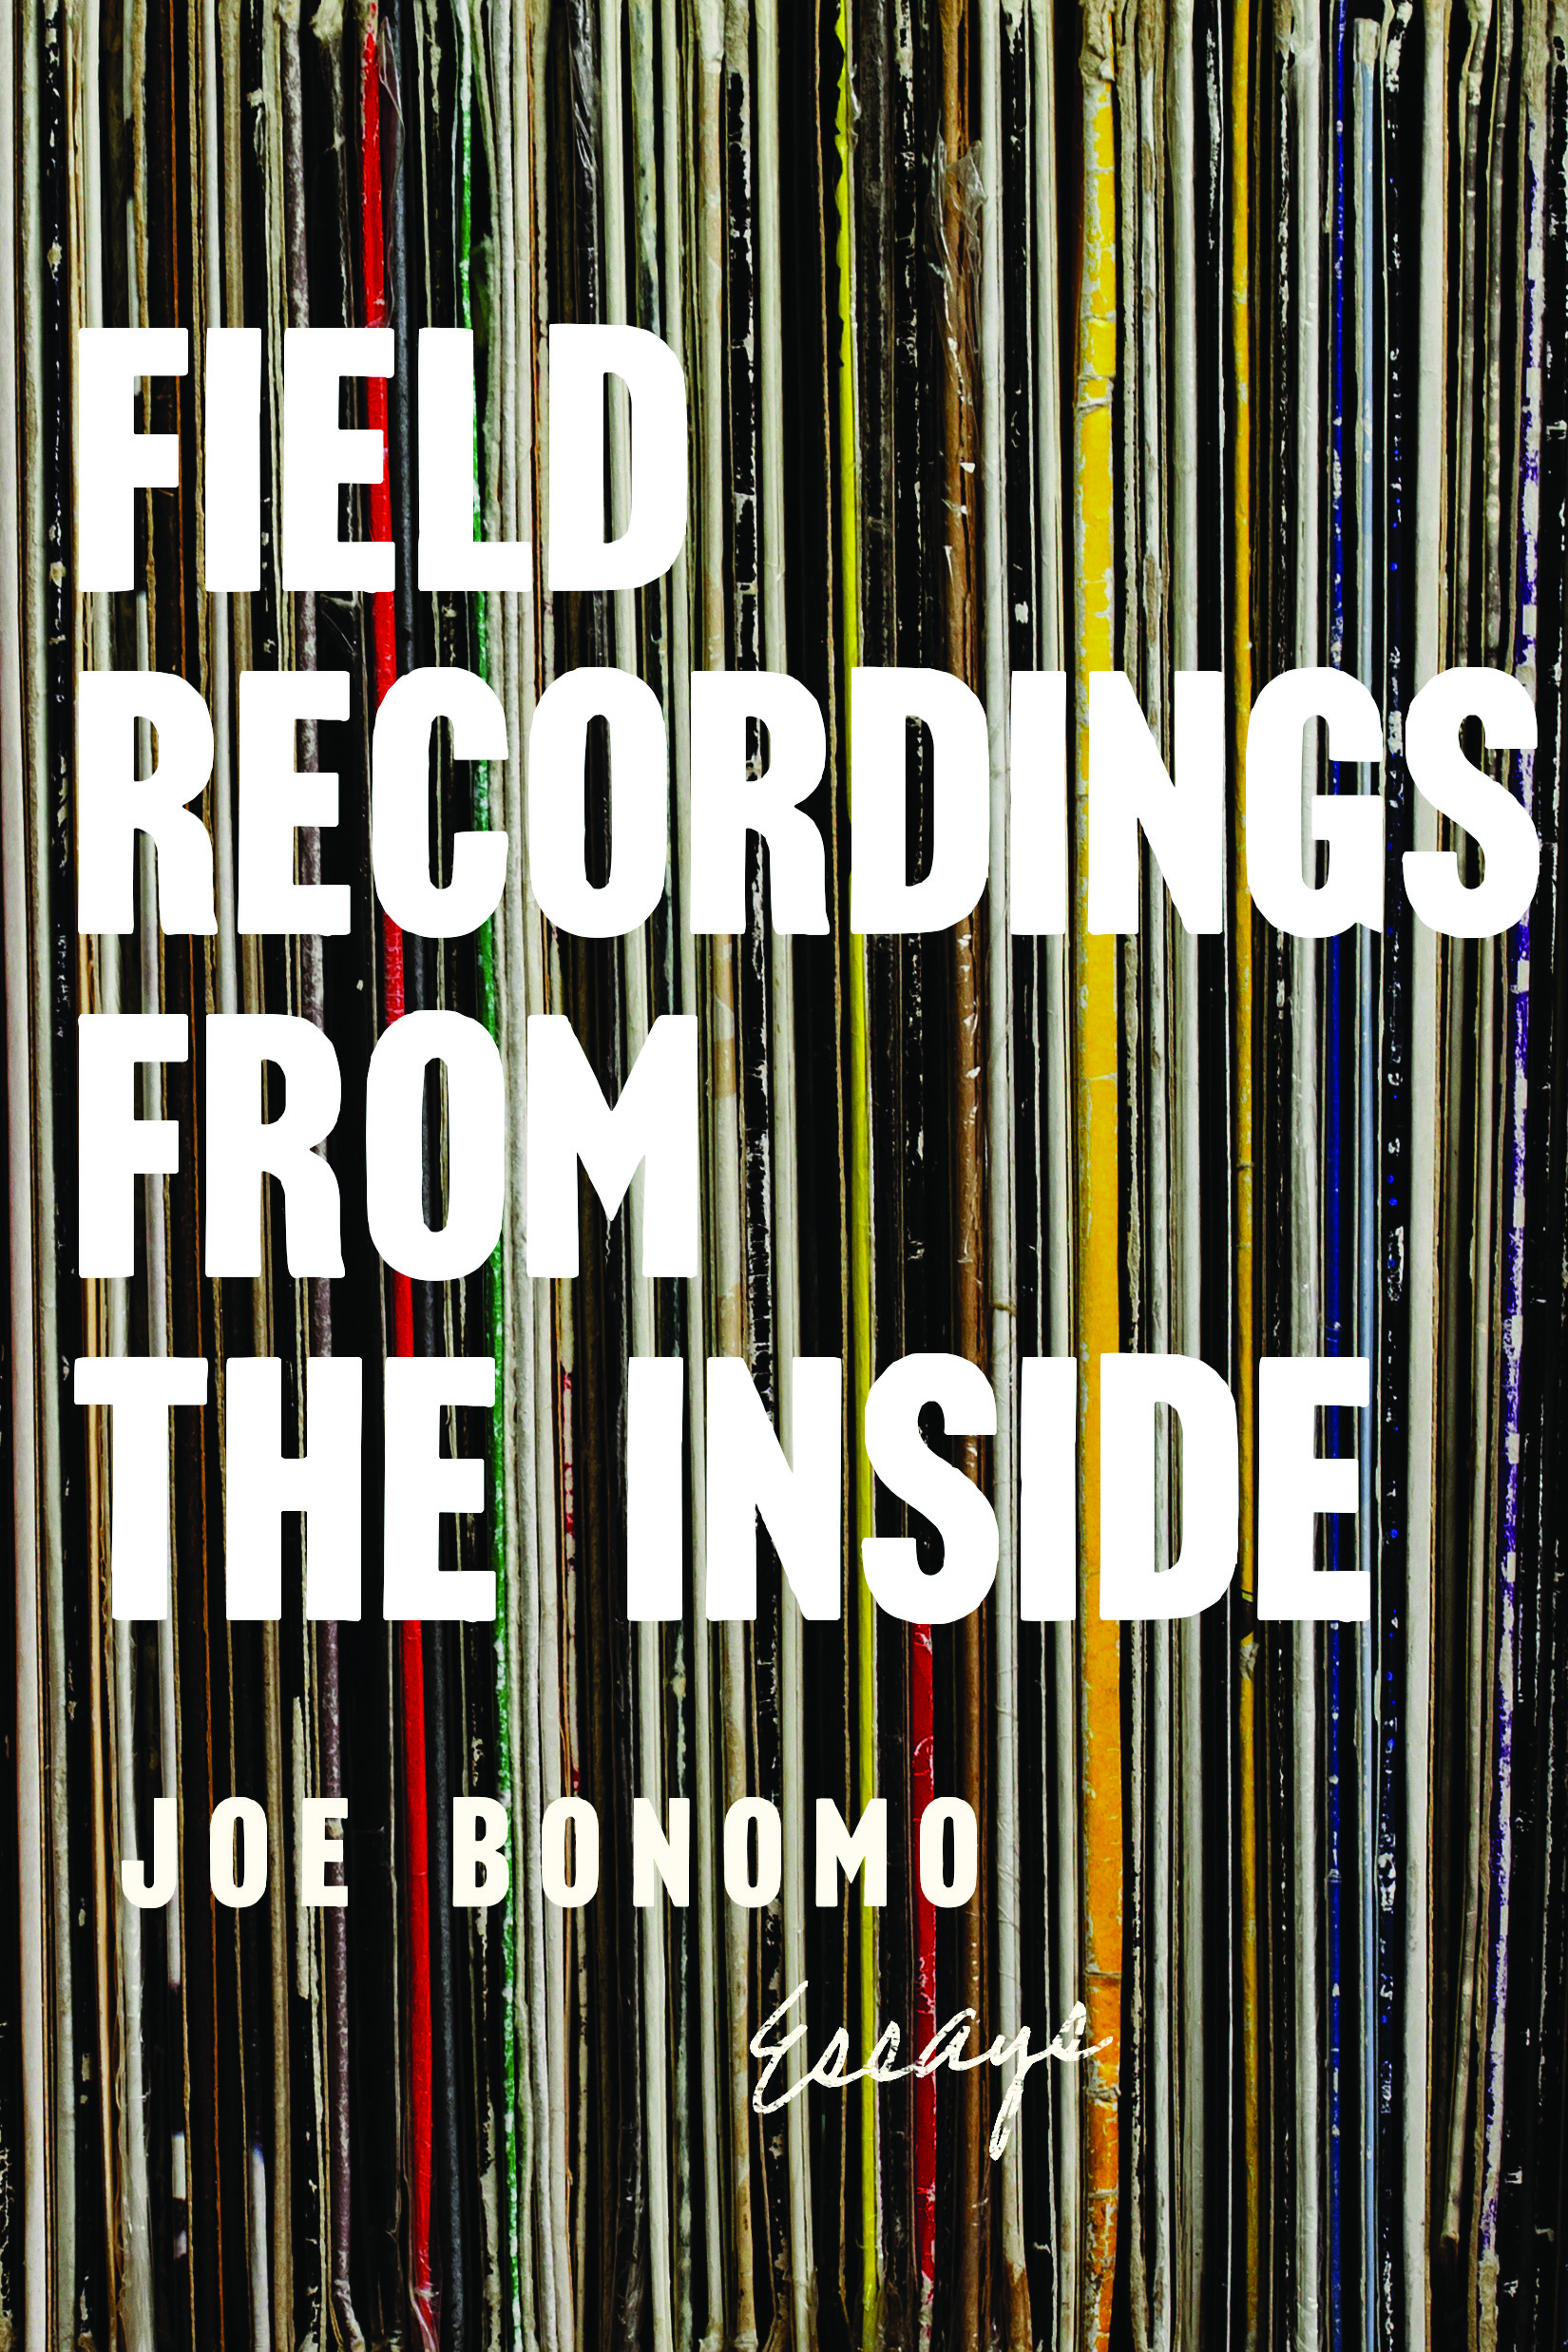 Field Recordings from the Inside